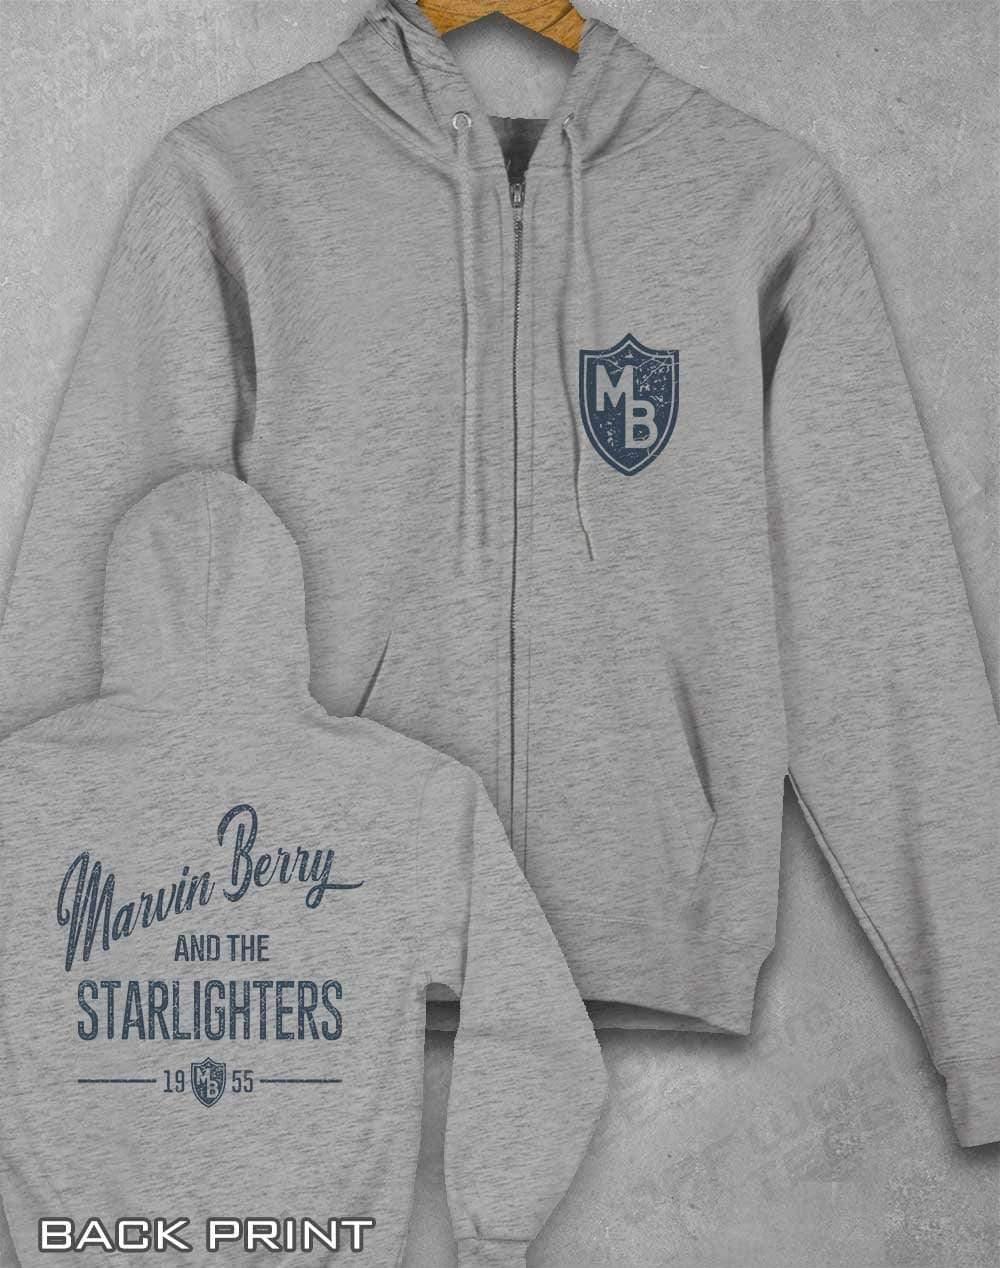 Marvin Berry and the Starlighters Ziphood XS / Heather Grey  - Off World Tees